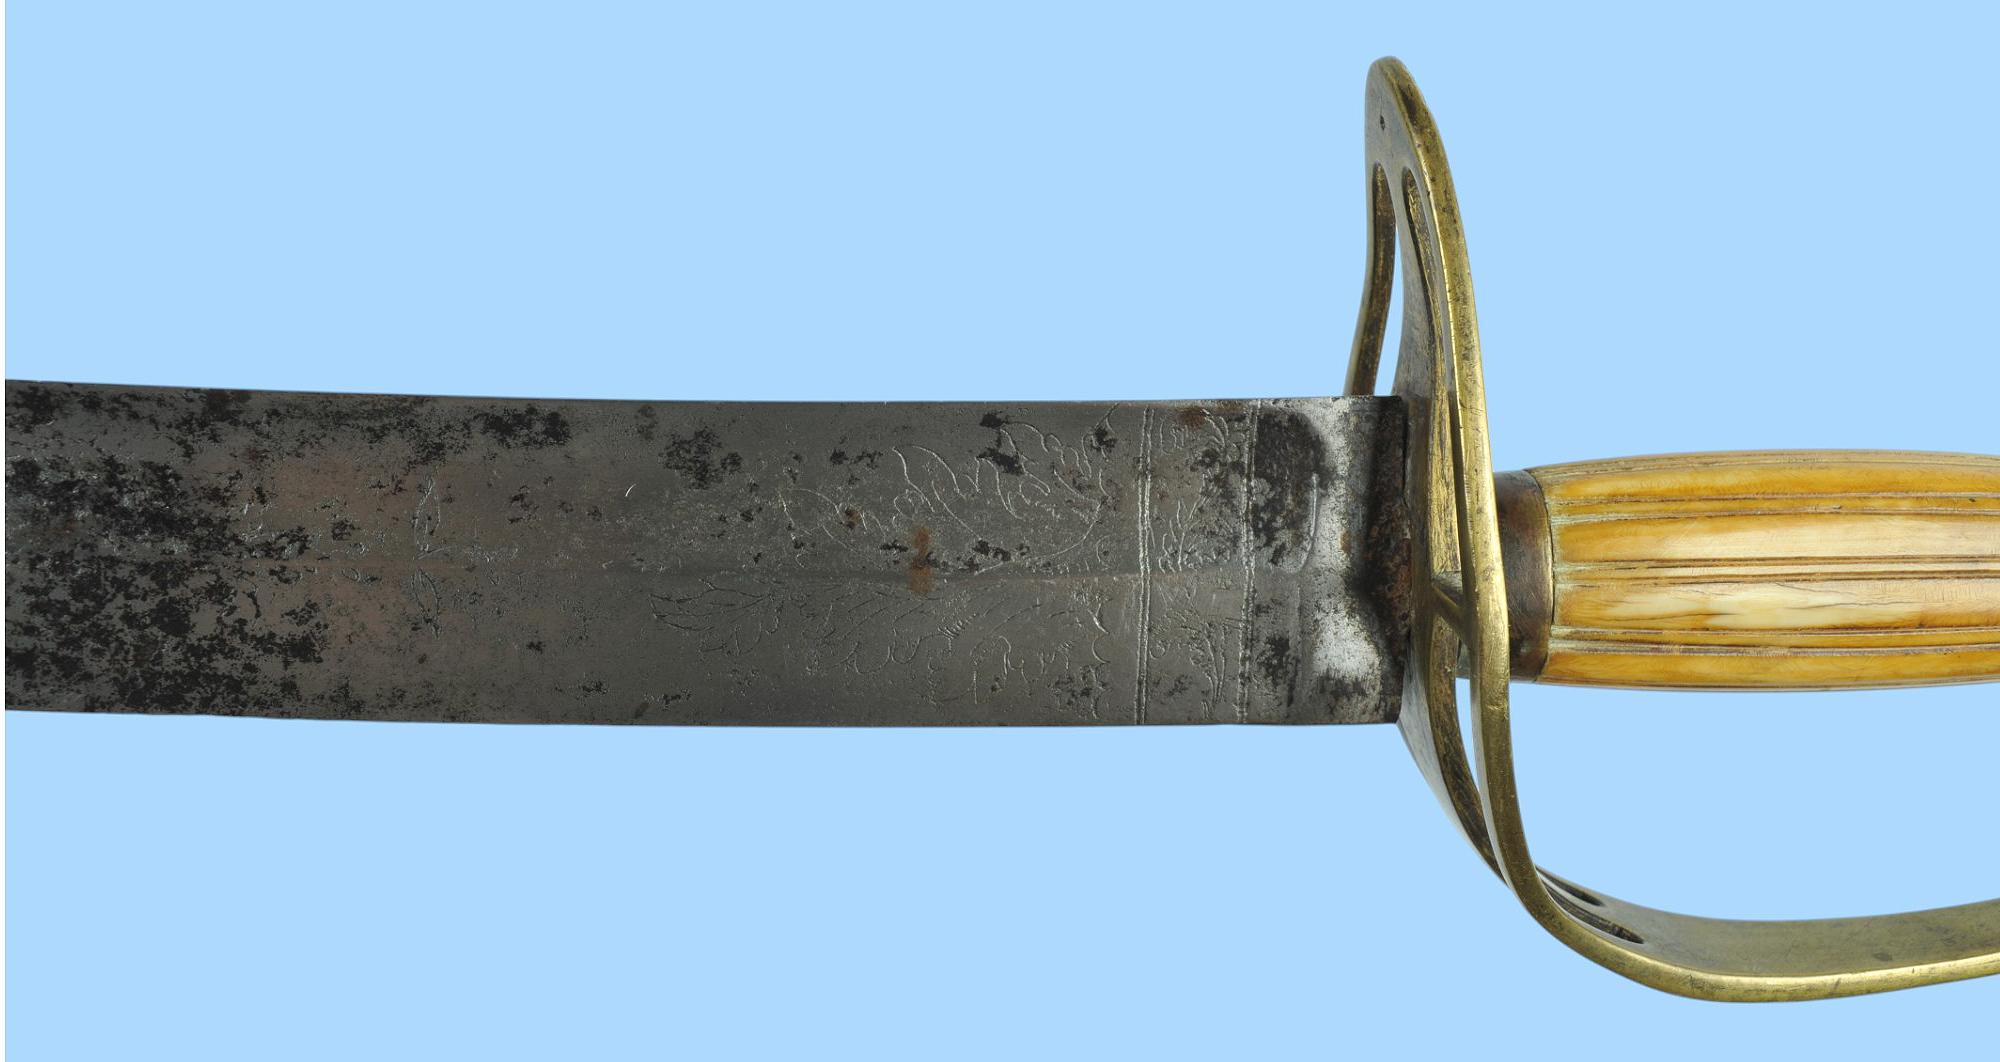 RARE US Army War of 1812 Officer's Eagle-Head Sword (KDW)